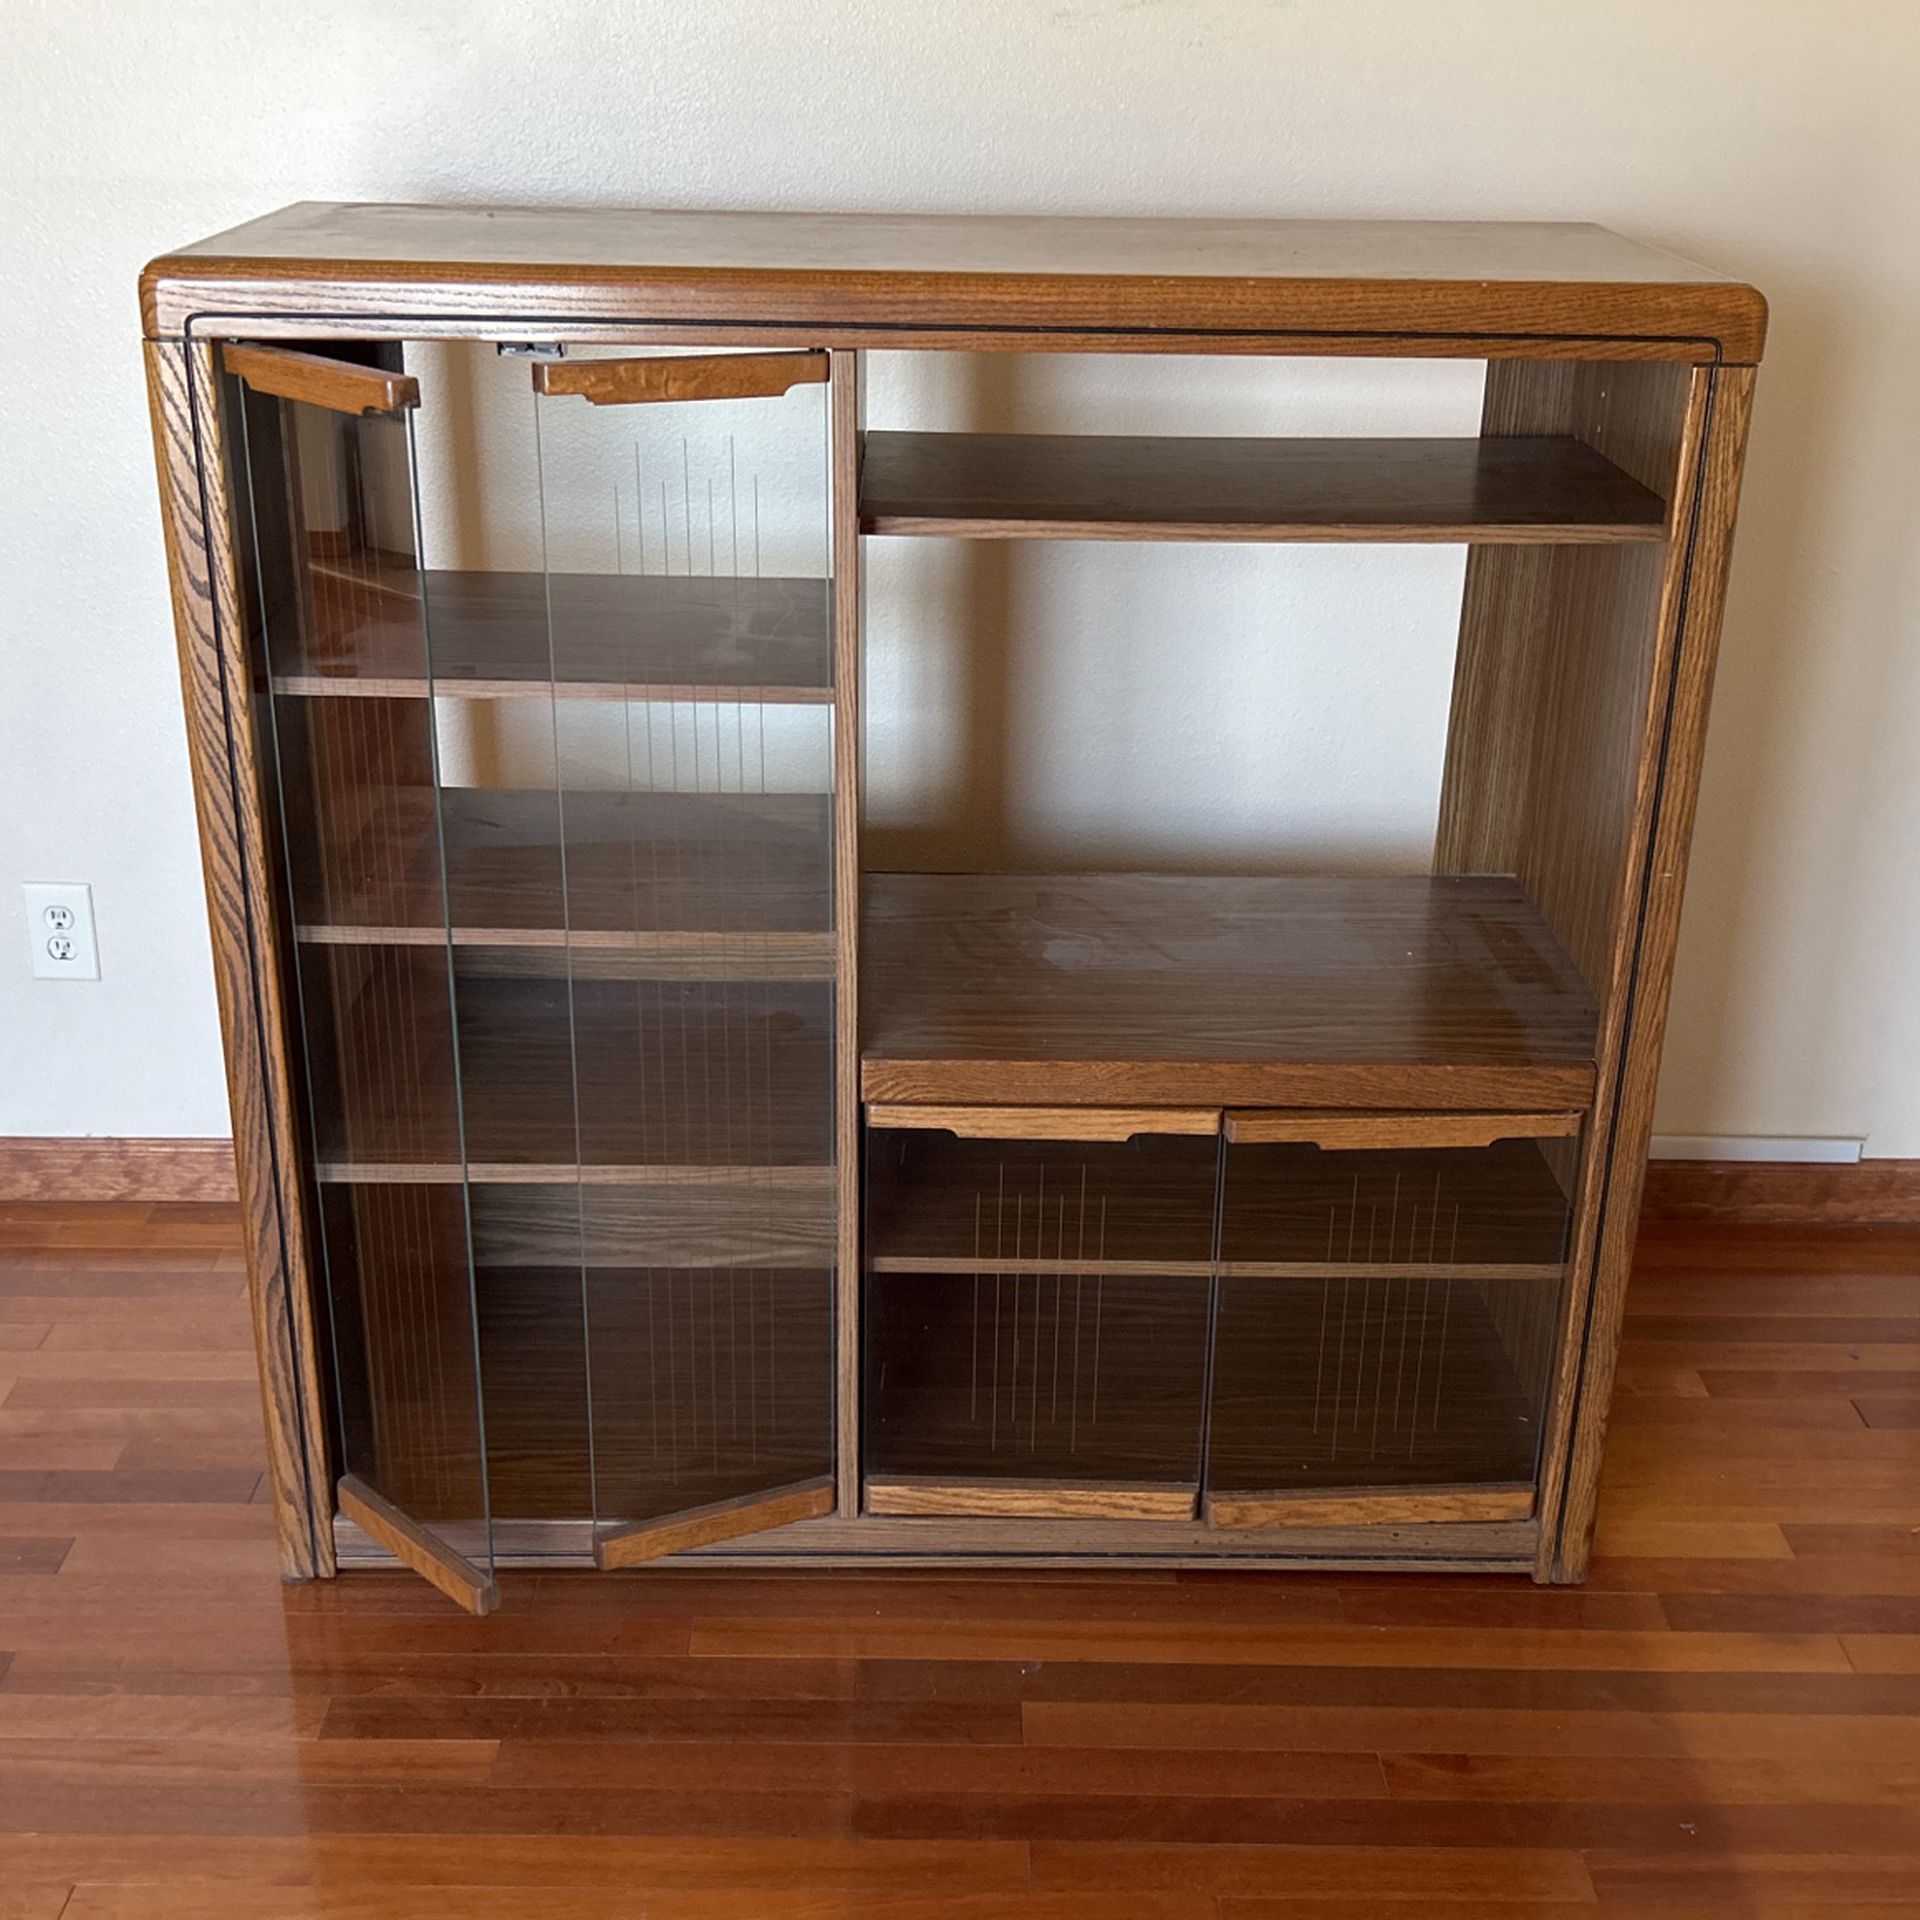 FREE Cabinet For Audio Gear (or whatever)